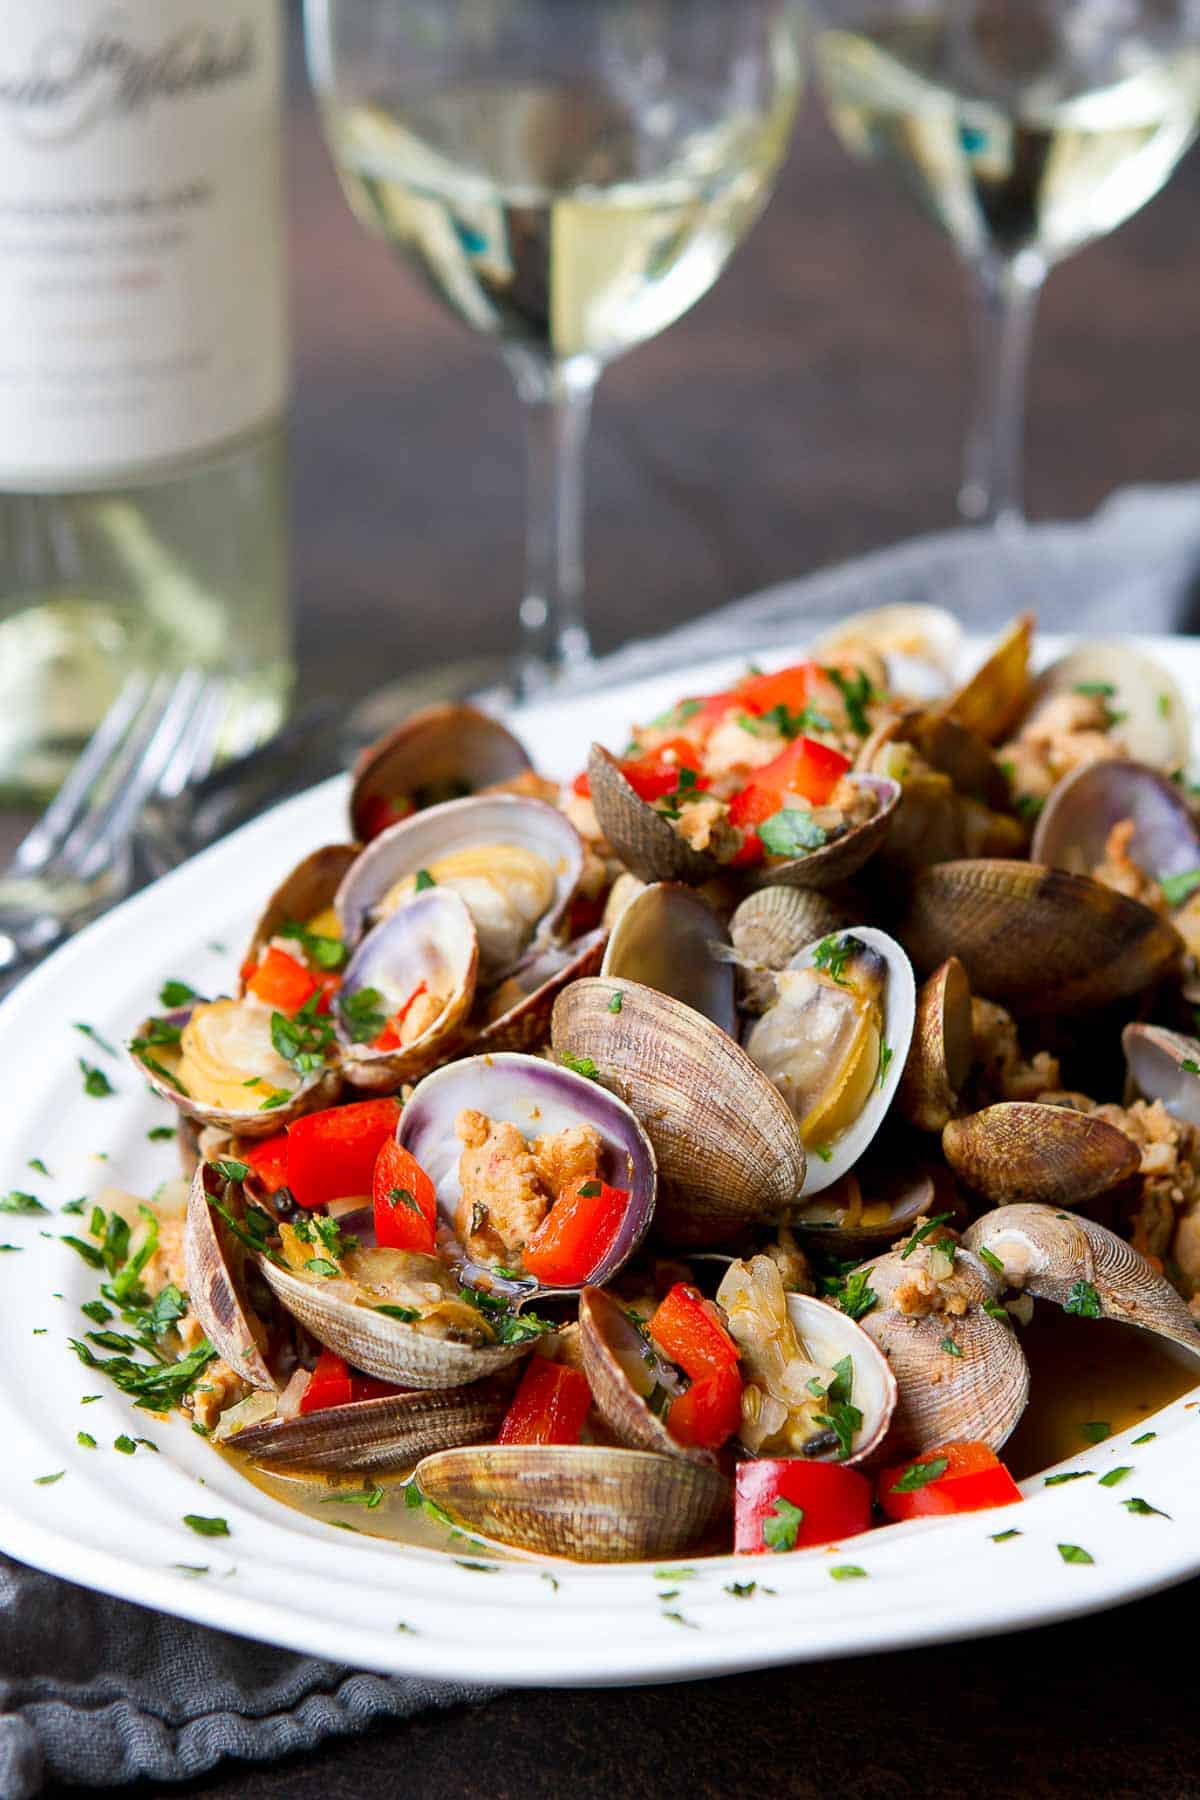 Steamed clams, sausage and red pepper in a white bowl, with glasses of wine in background.